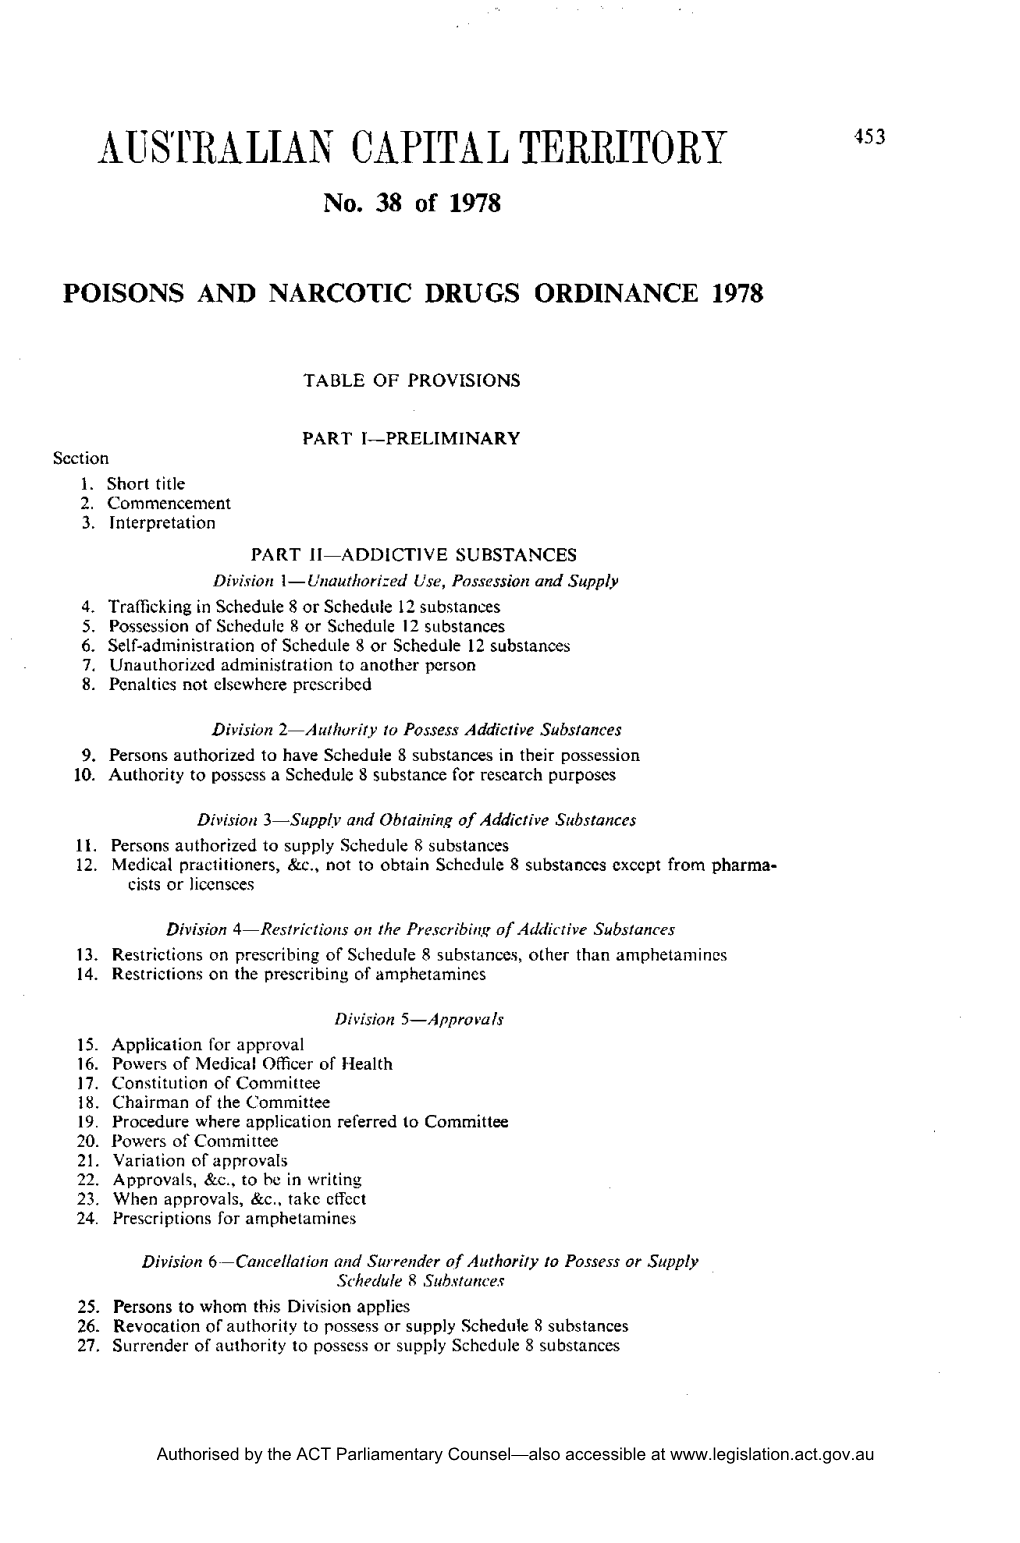 No. 38 of 1978 POISONS and NARCOTIC DRUGS ORDINANCE